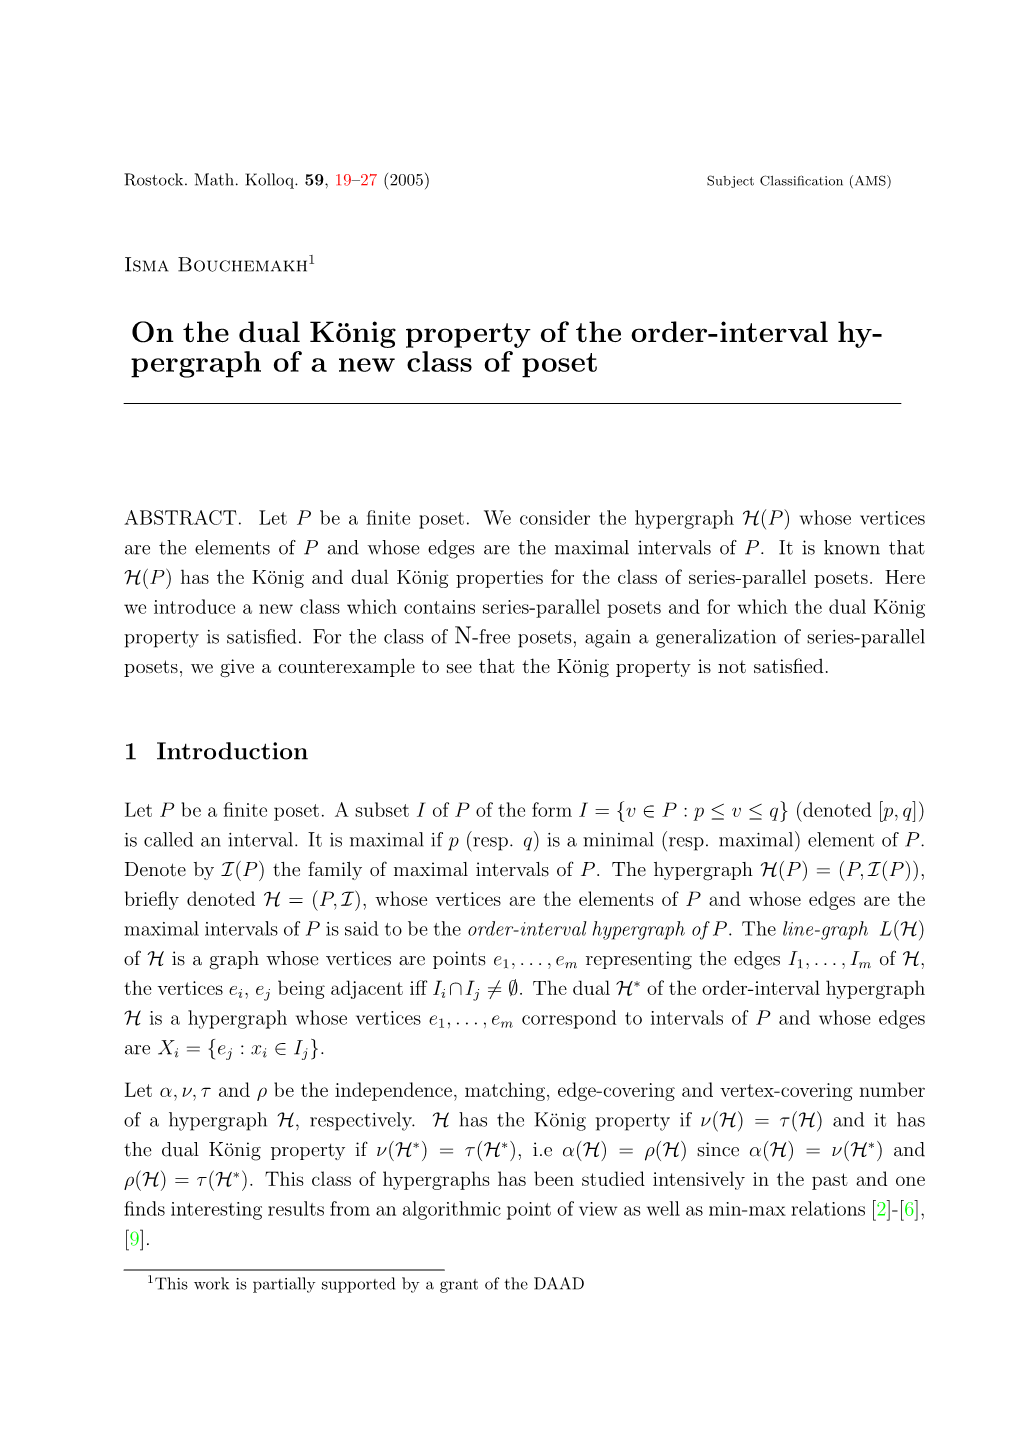 On the Dual König Property of the Order-Interval Hy- Pergraph of a New